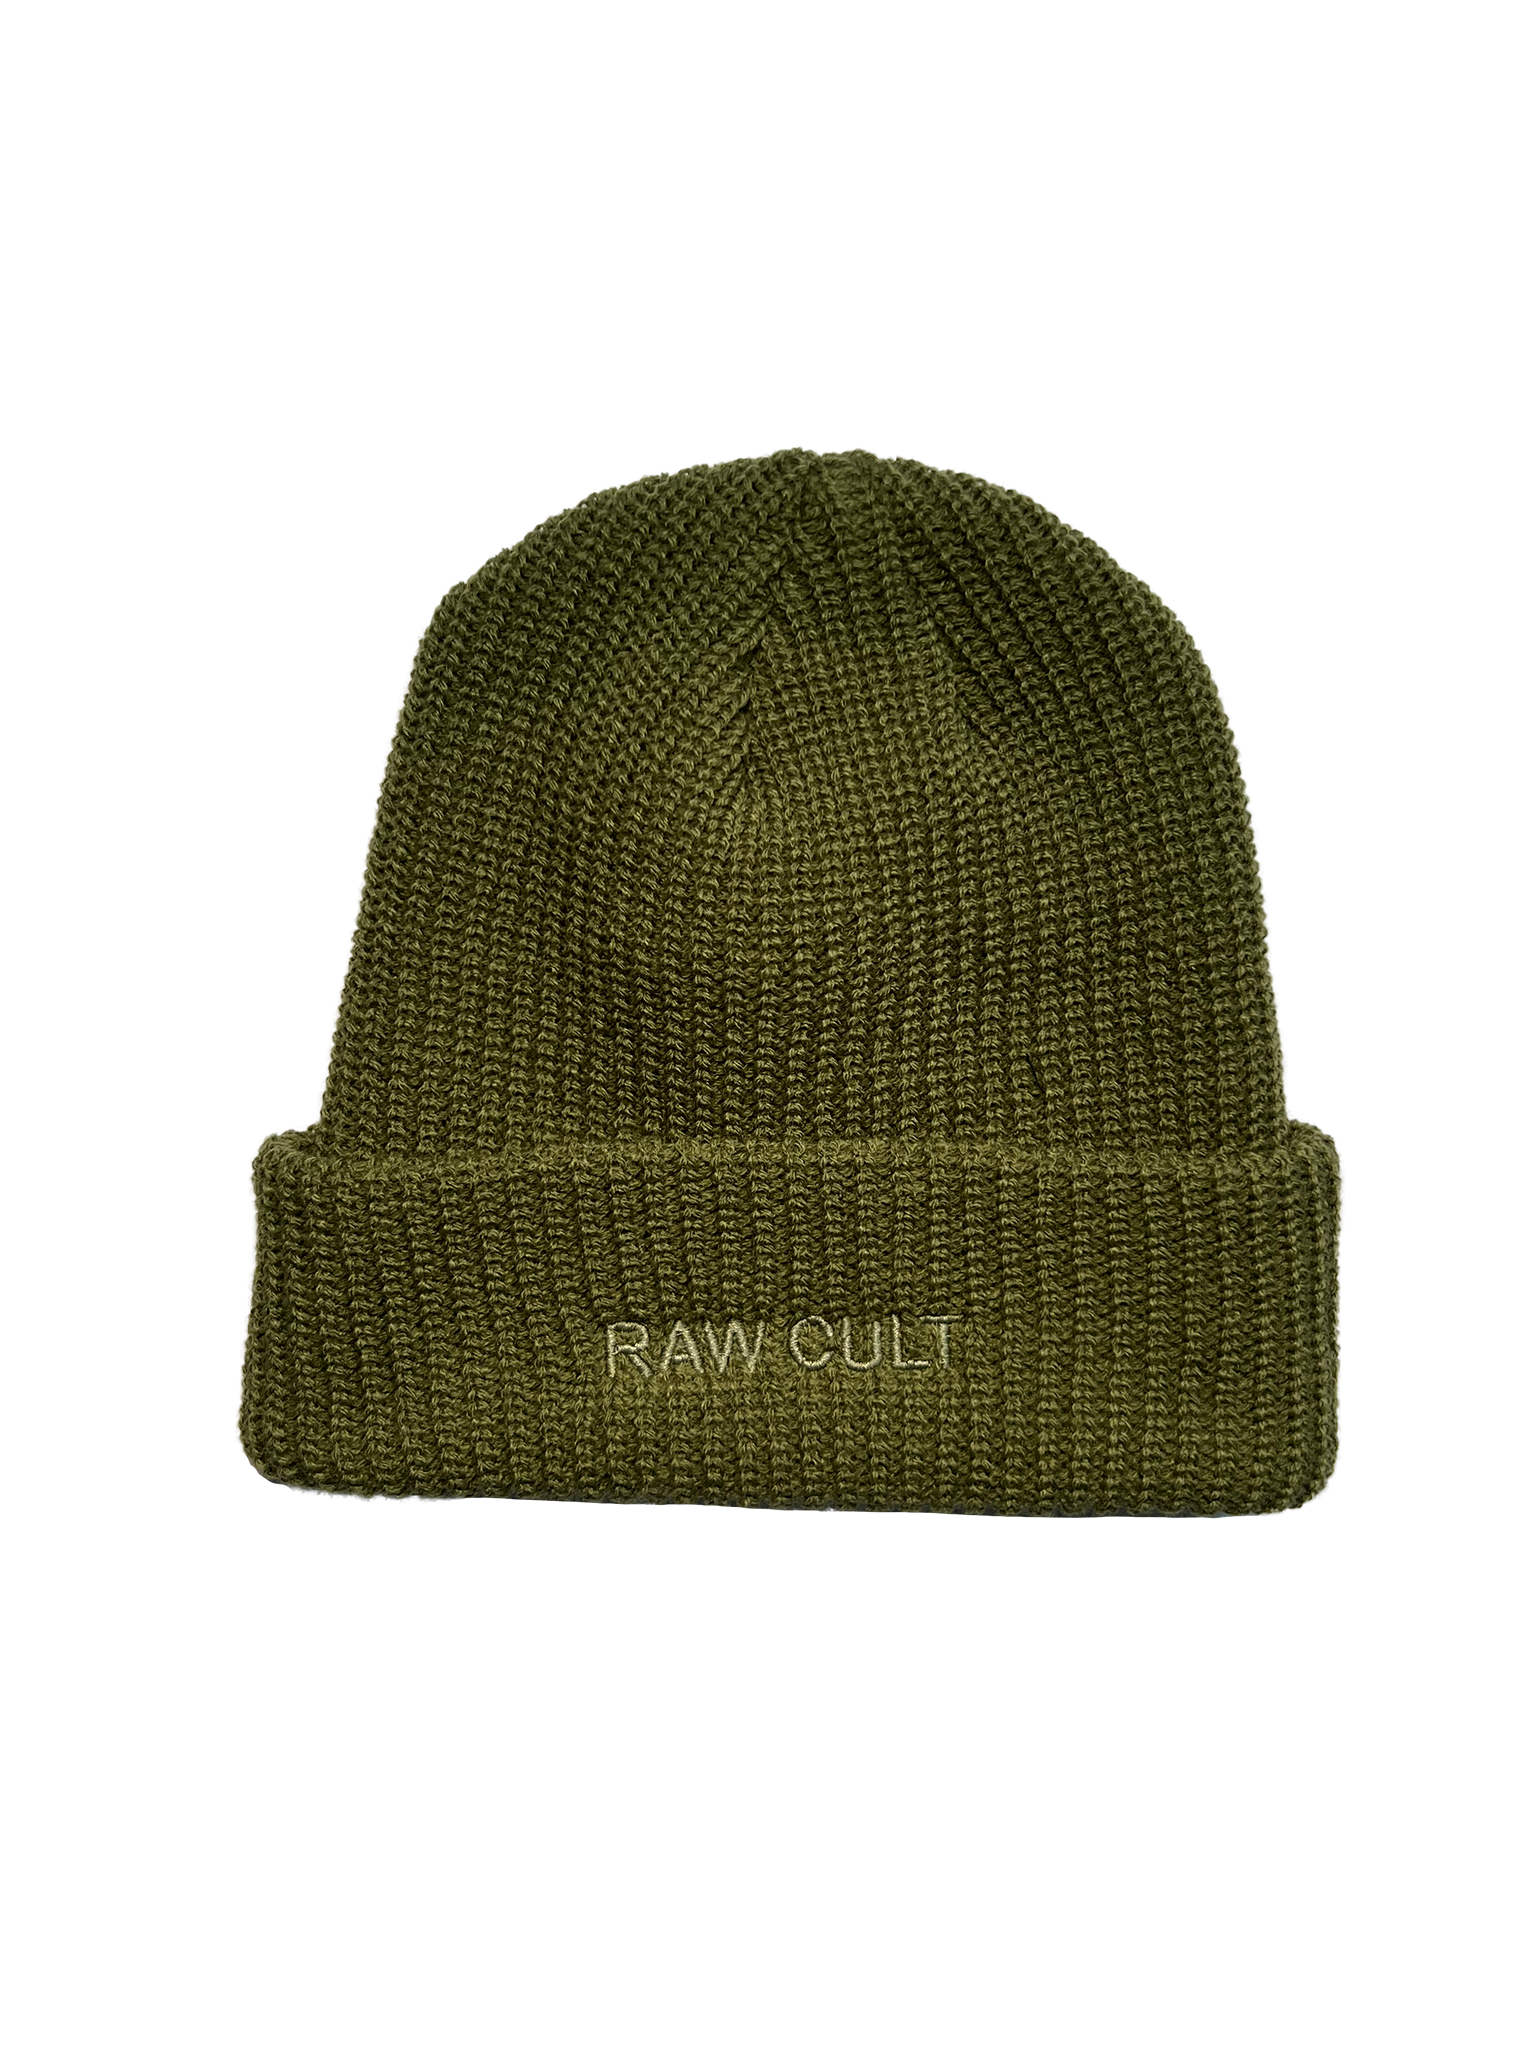 RAW CULT | Keep It Simple Tuque - Army